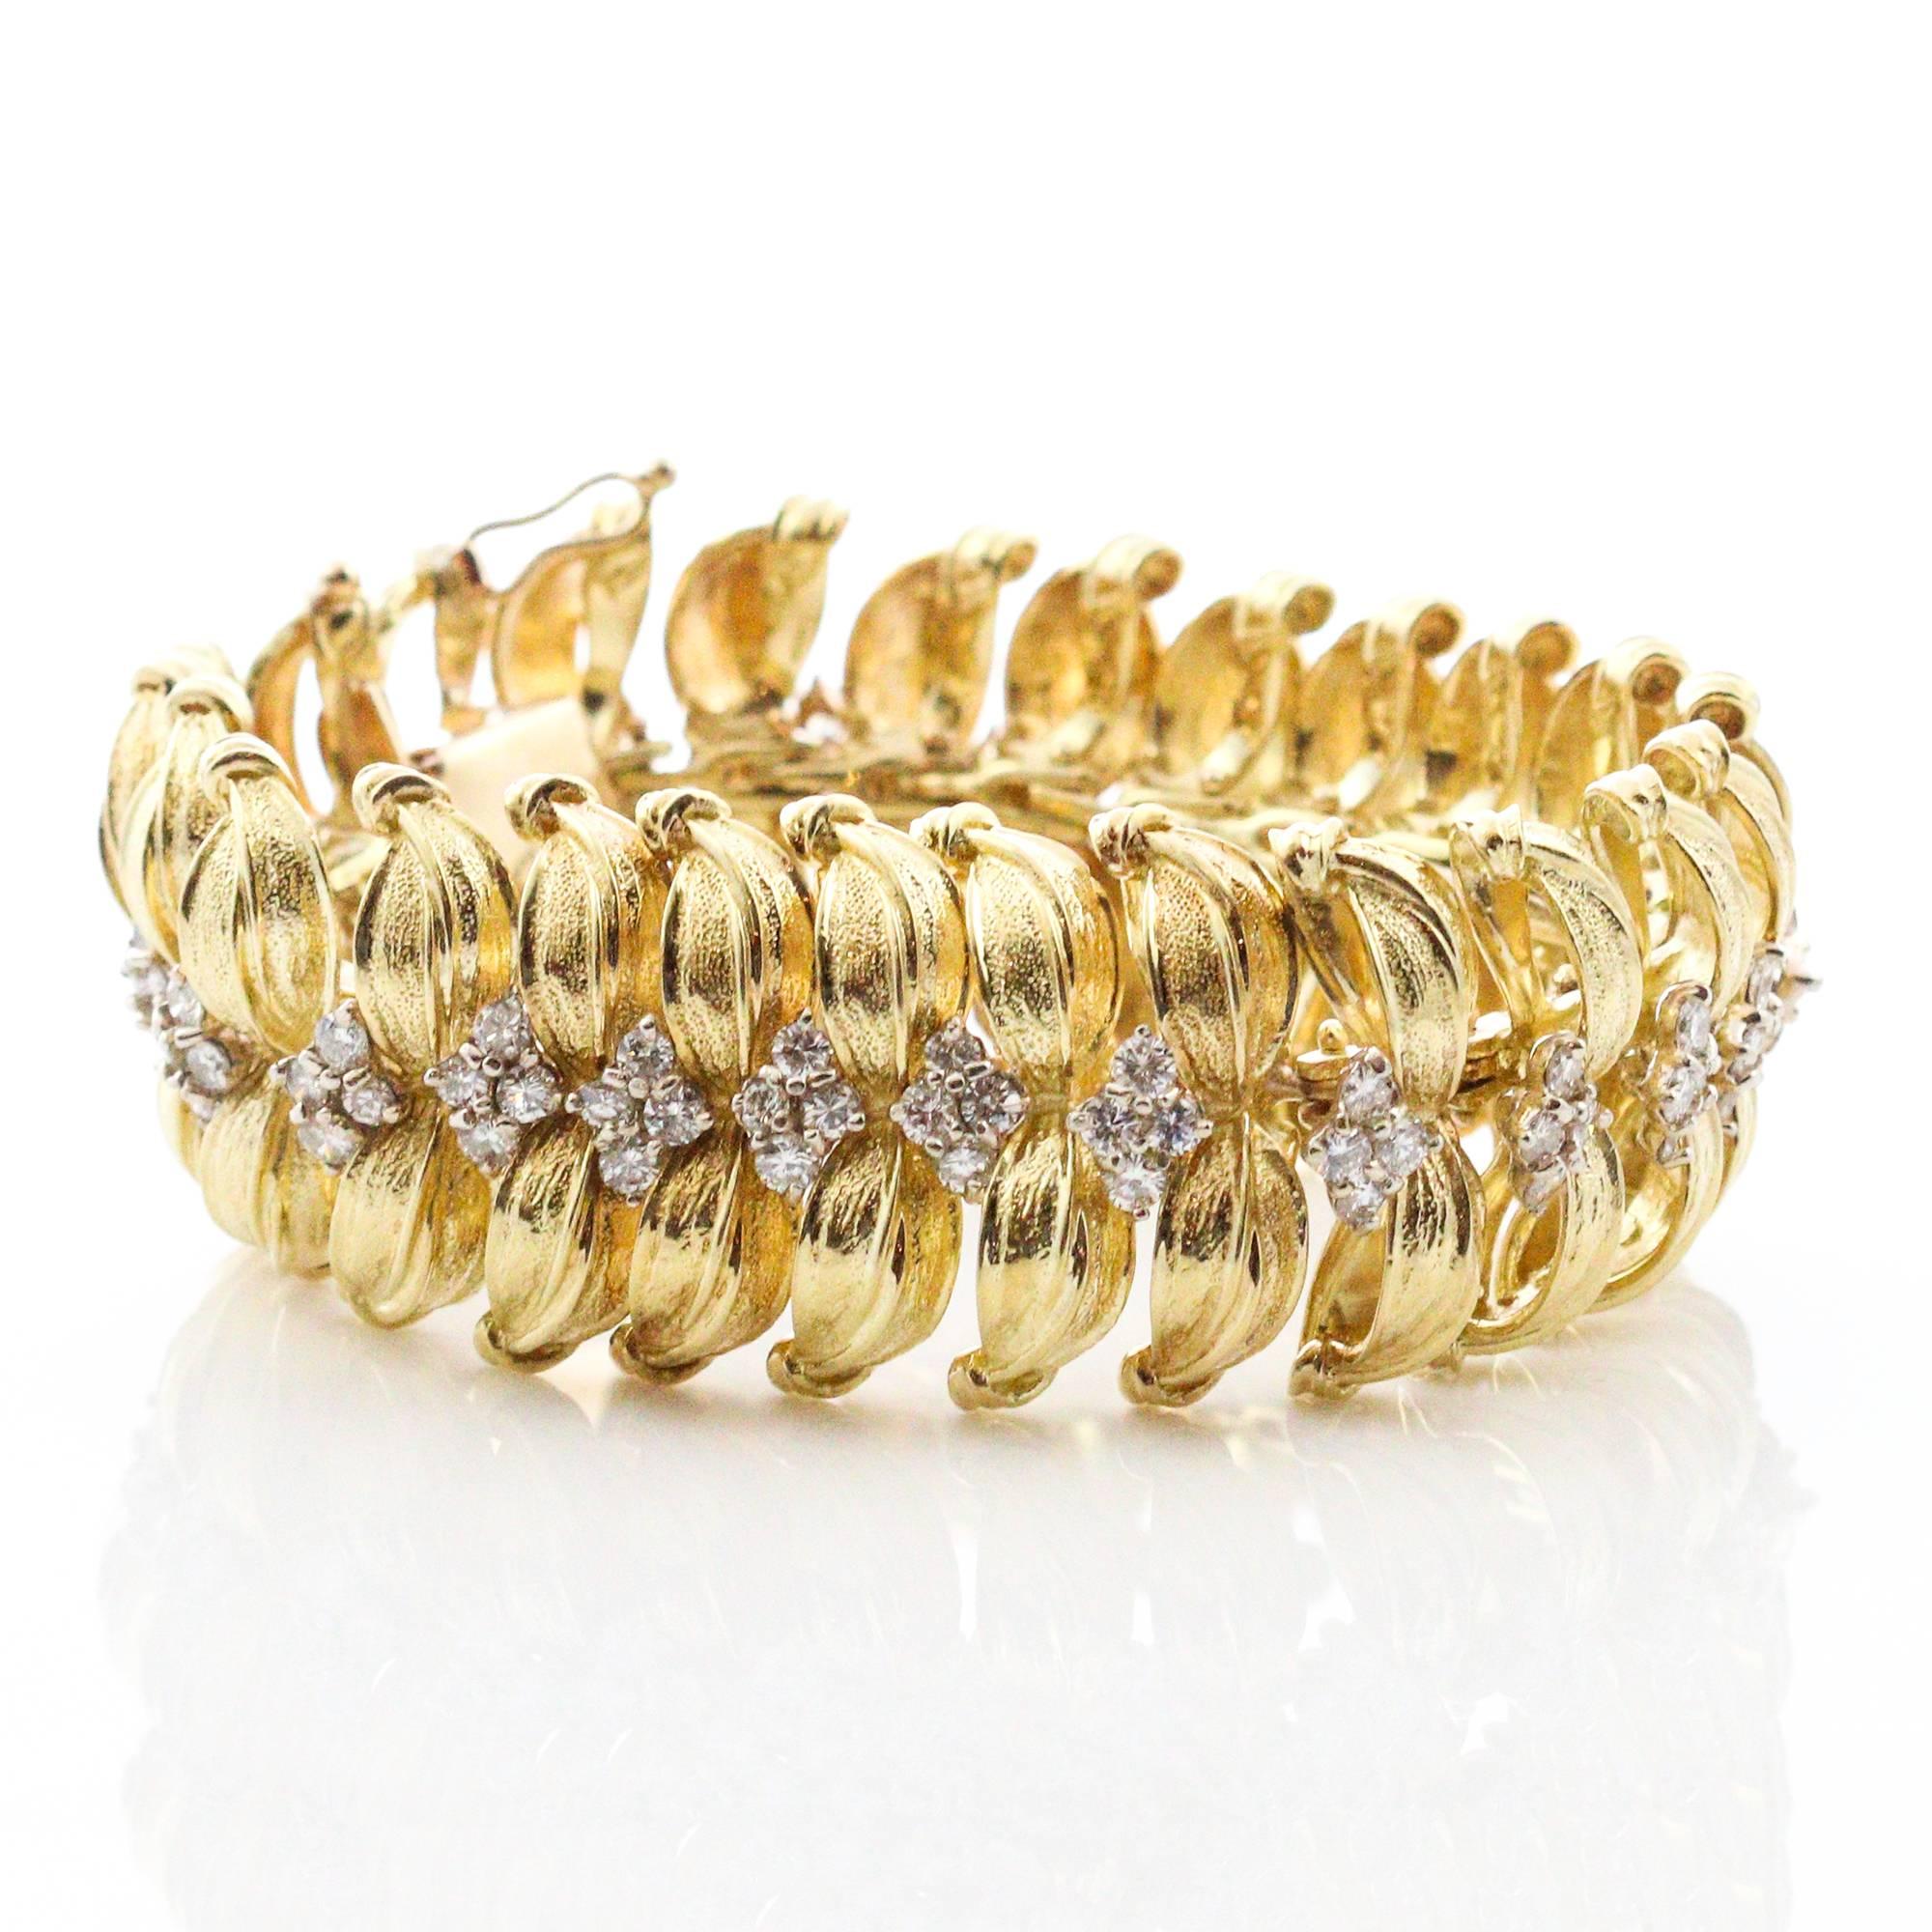 This Modernist bracelet features yellow gold leaf inspired link designs, each one containing 4 round brilliant cut diamonds. There are a total of 100 round diamonds, which weigh a combined total of approximately 7.00ctw and grade as 